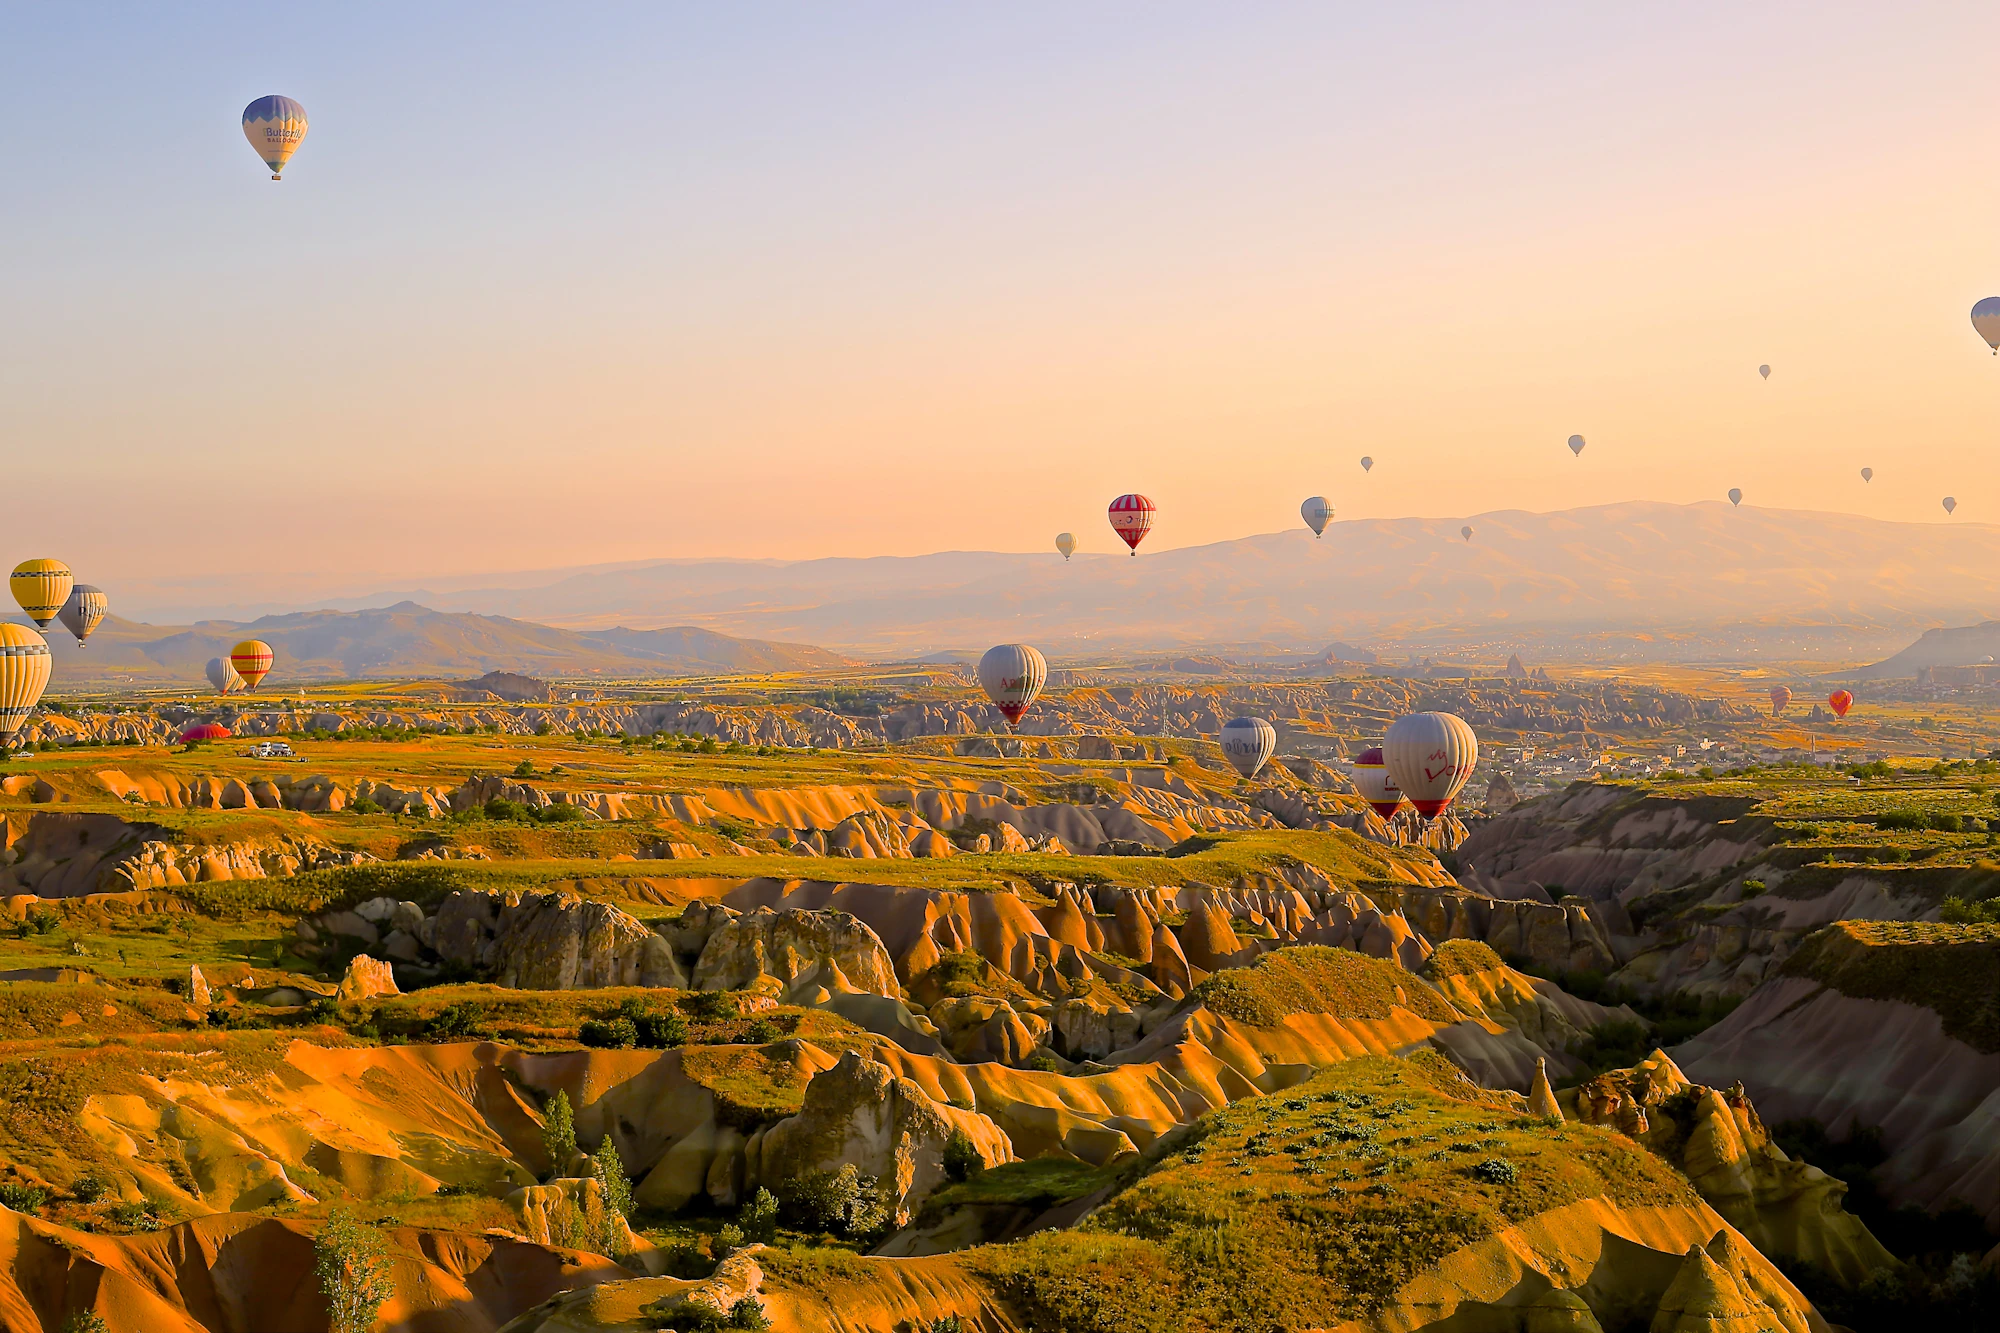 Hot air balloons soar at sunrise over the unique golden landscapes of Cappadocia, providing a breathtaking view.